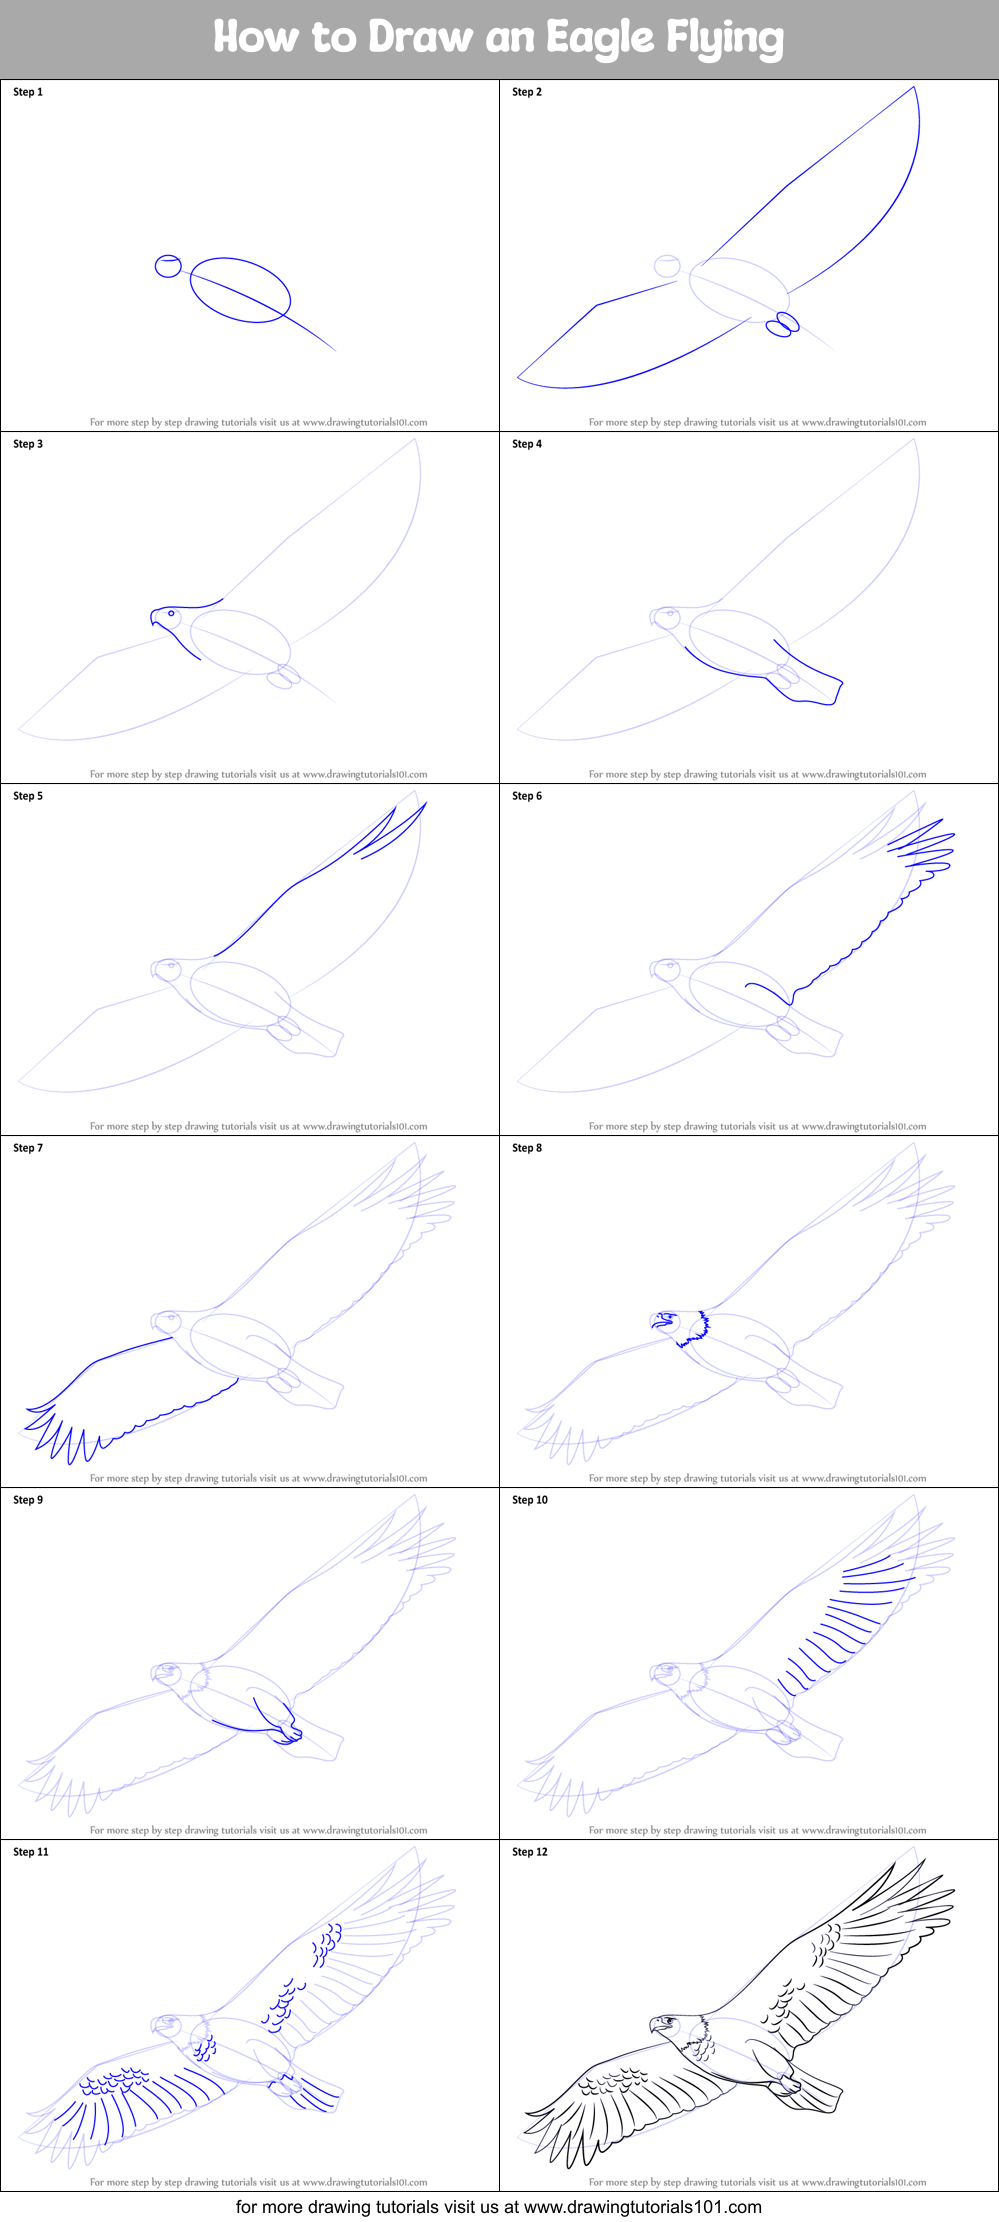 How to Draw an Eagle Flying printable step by step drawing sheet